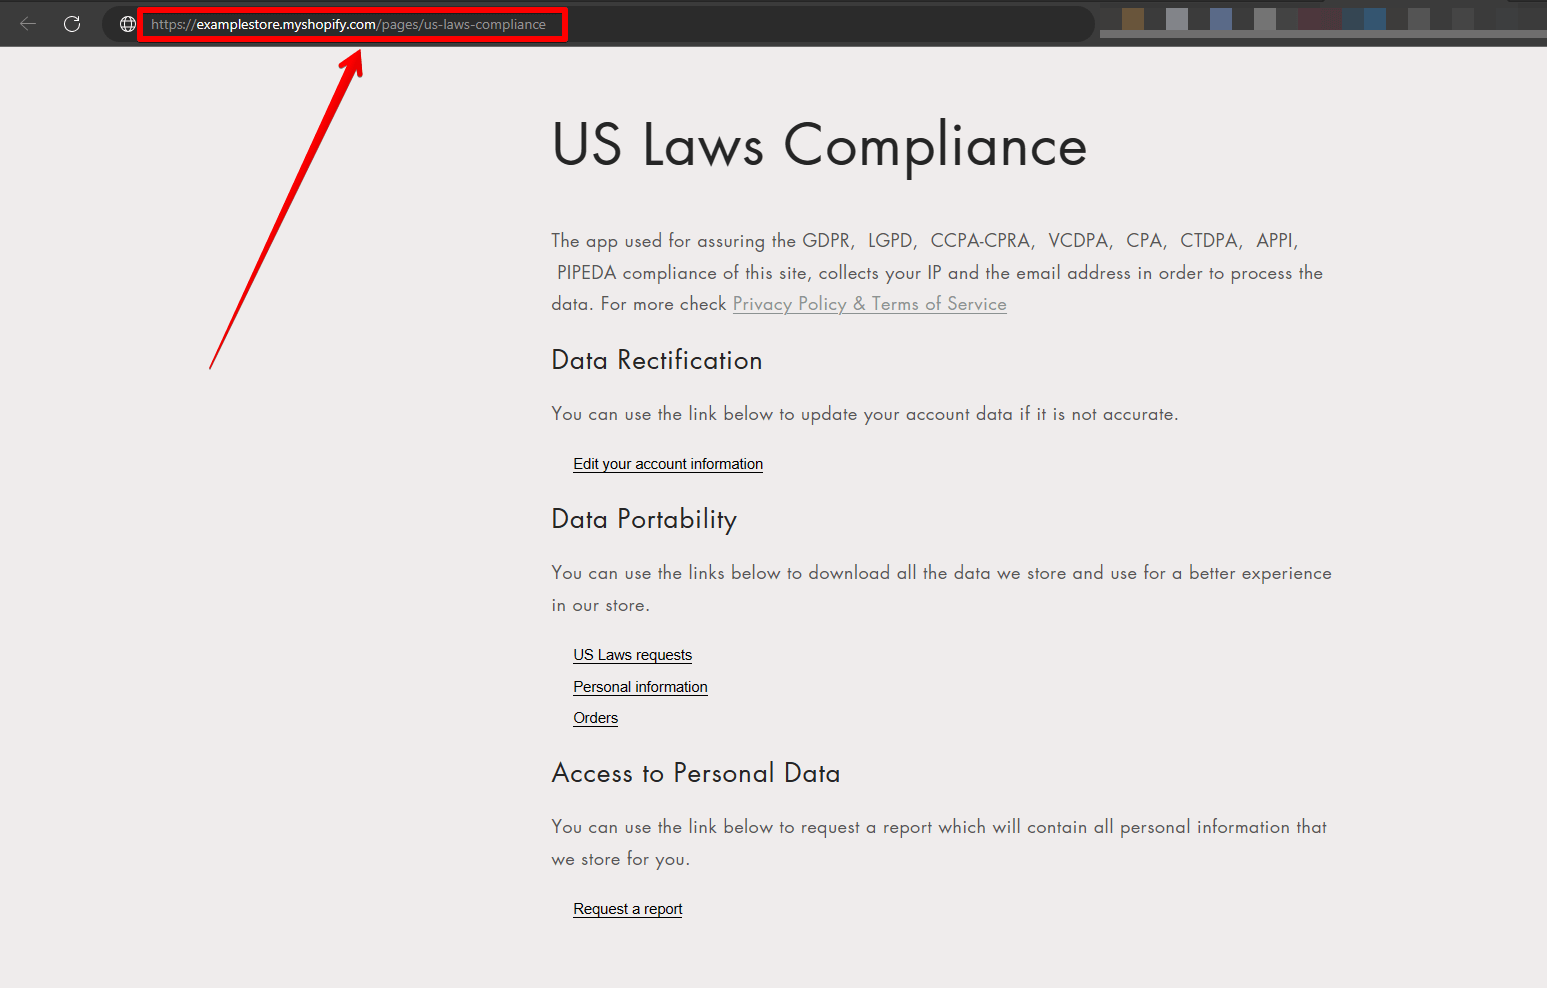 US Laws Compliance Page Link